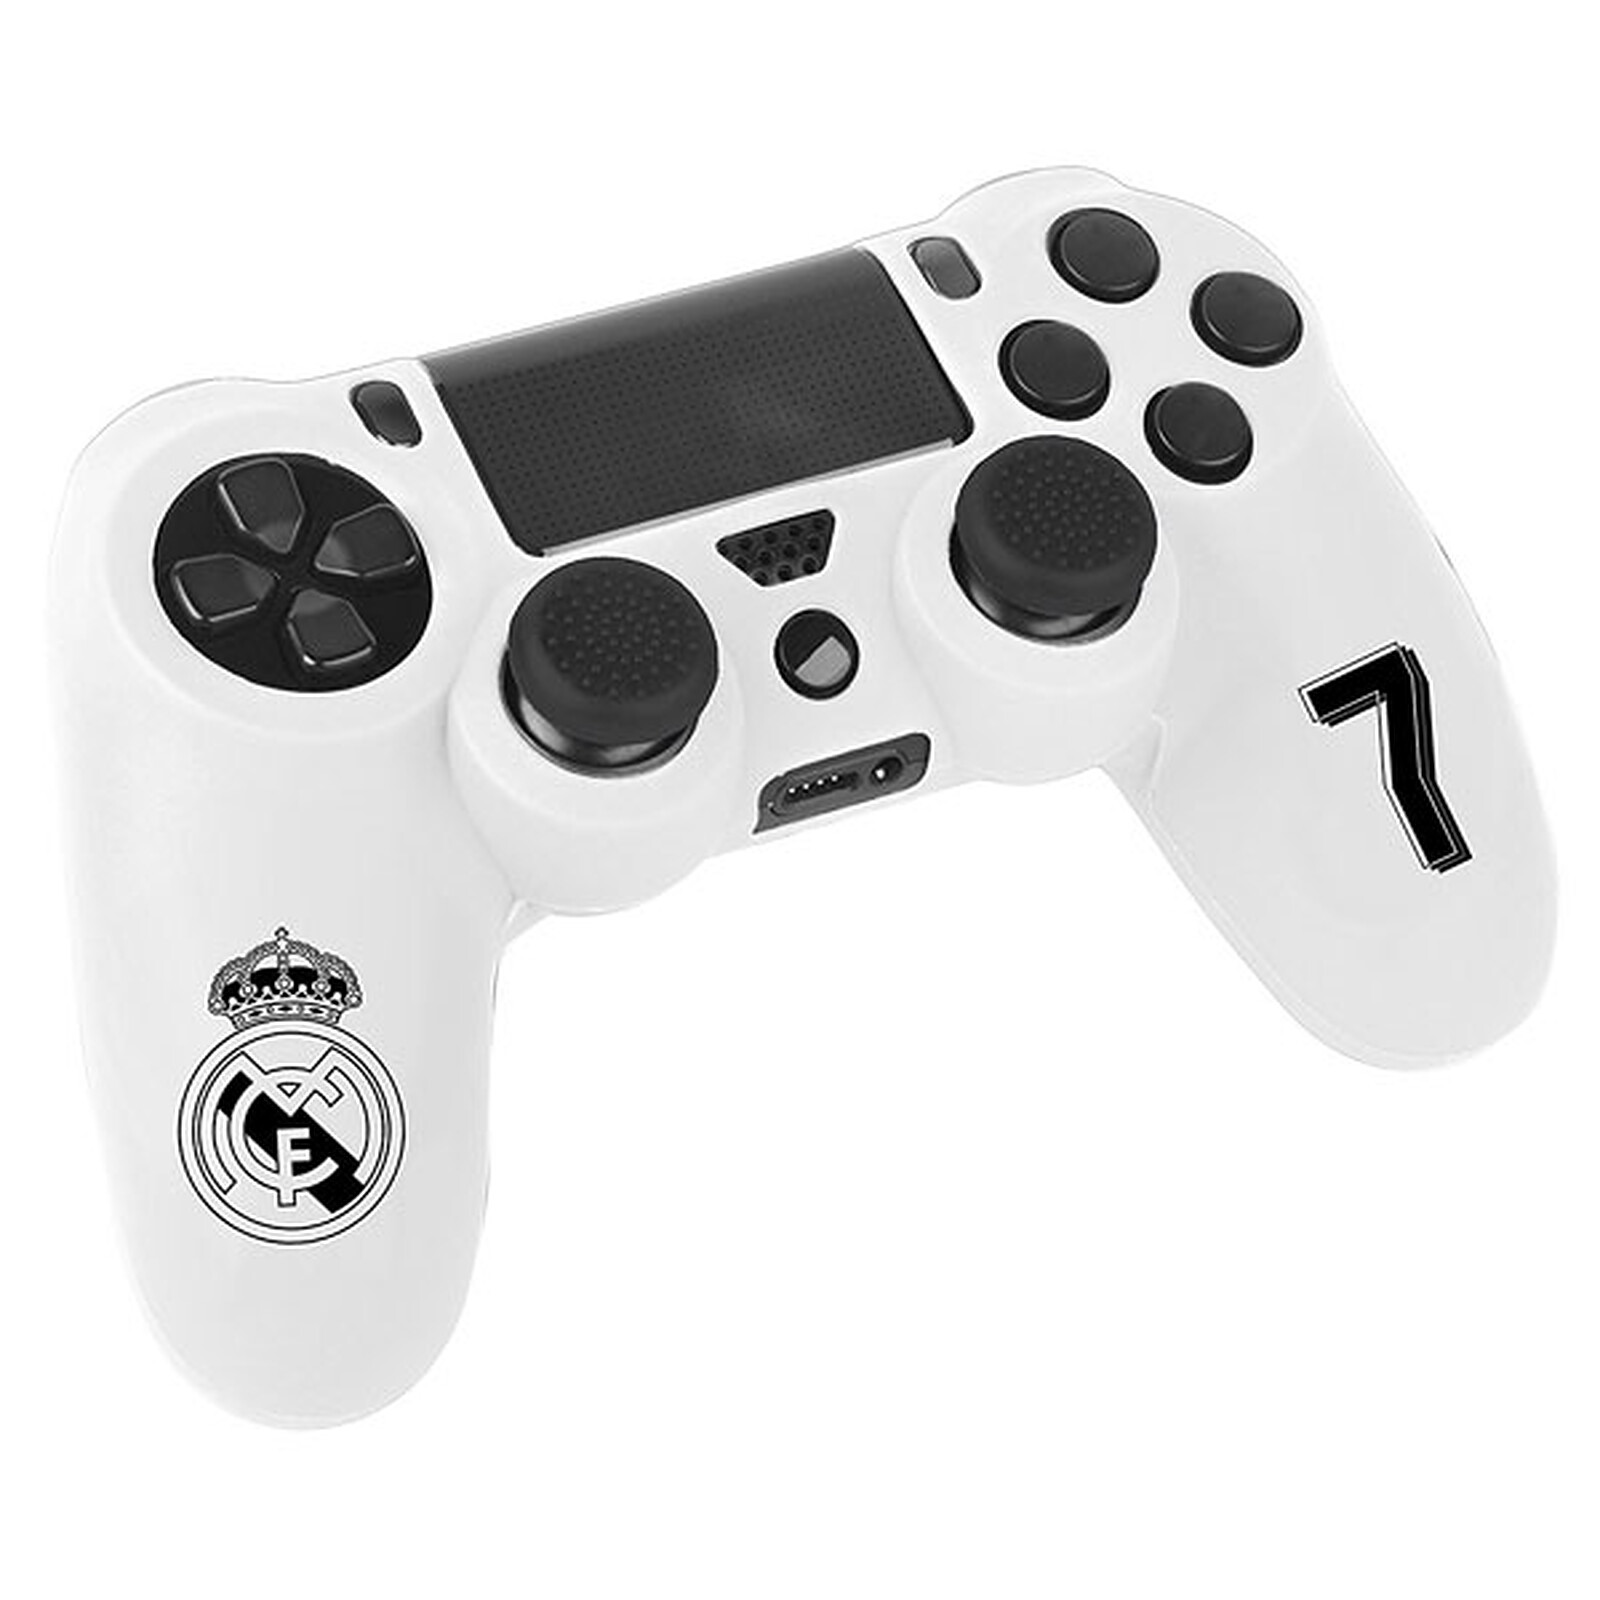 Manette PS4 sony Real Madrid